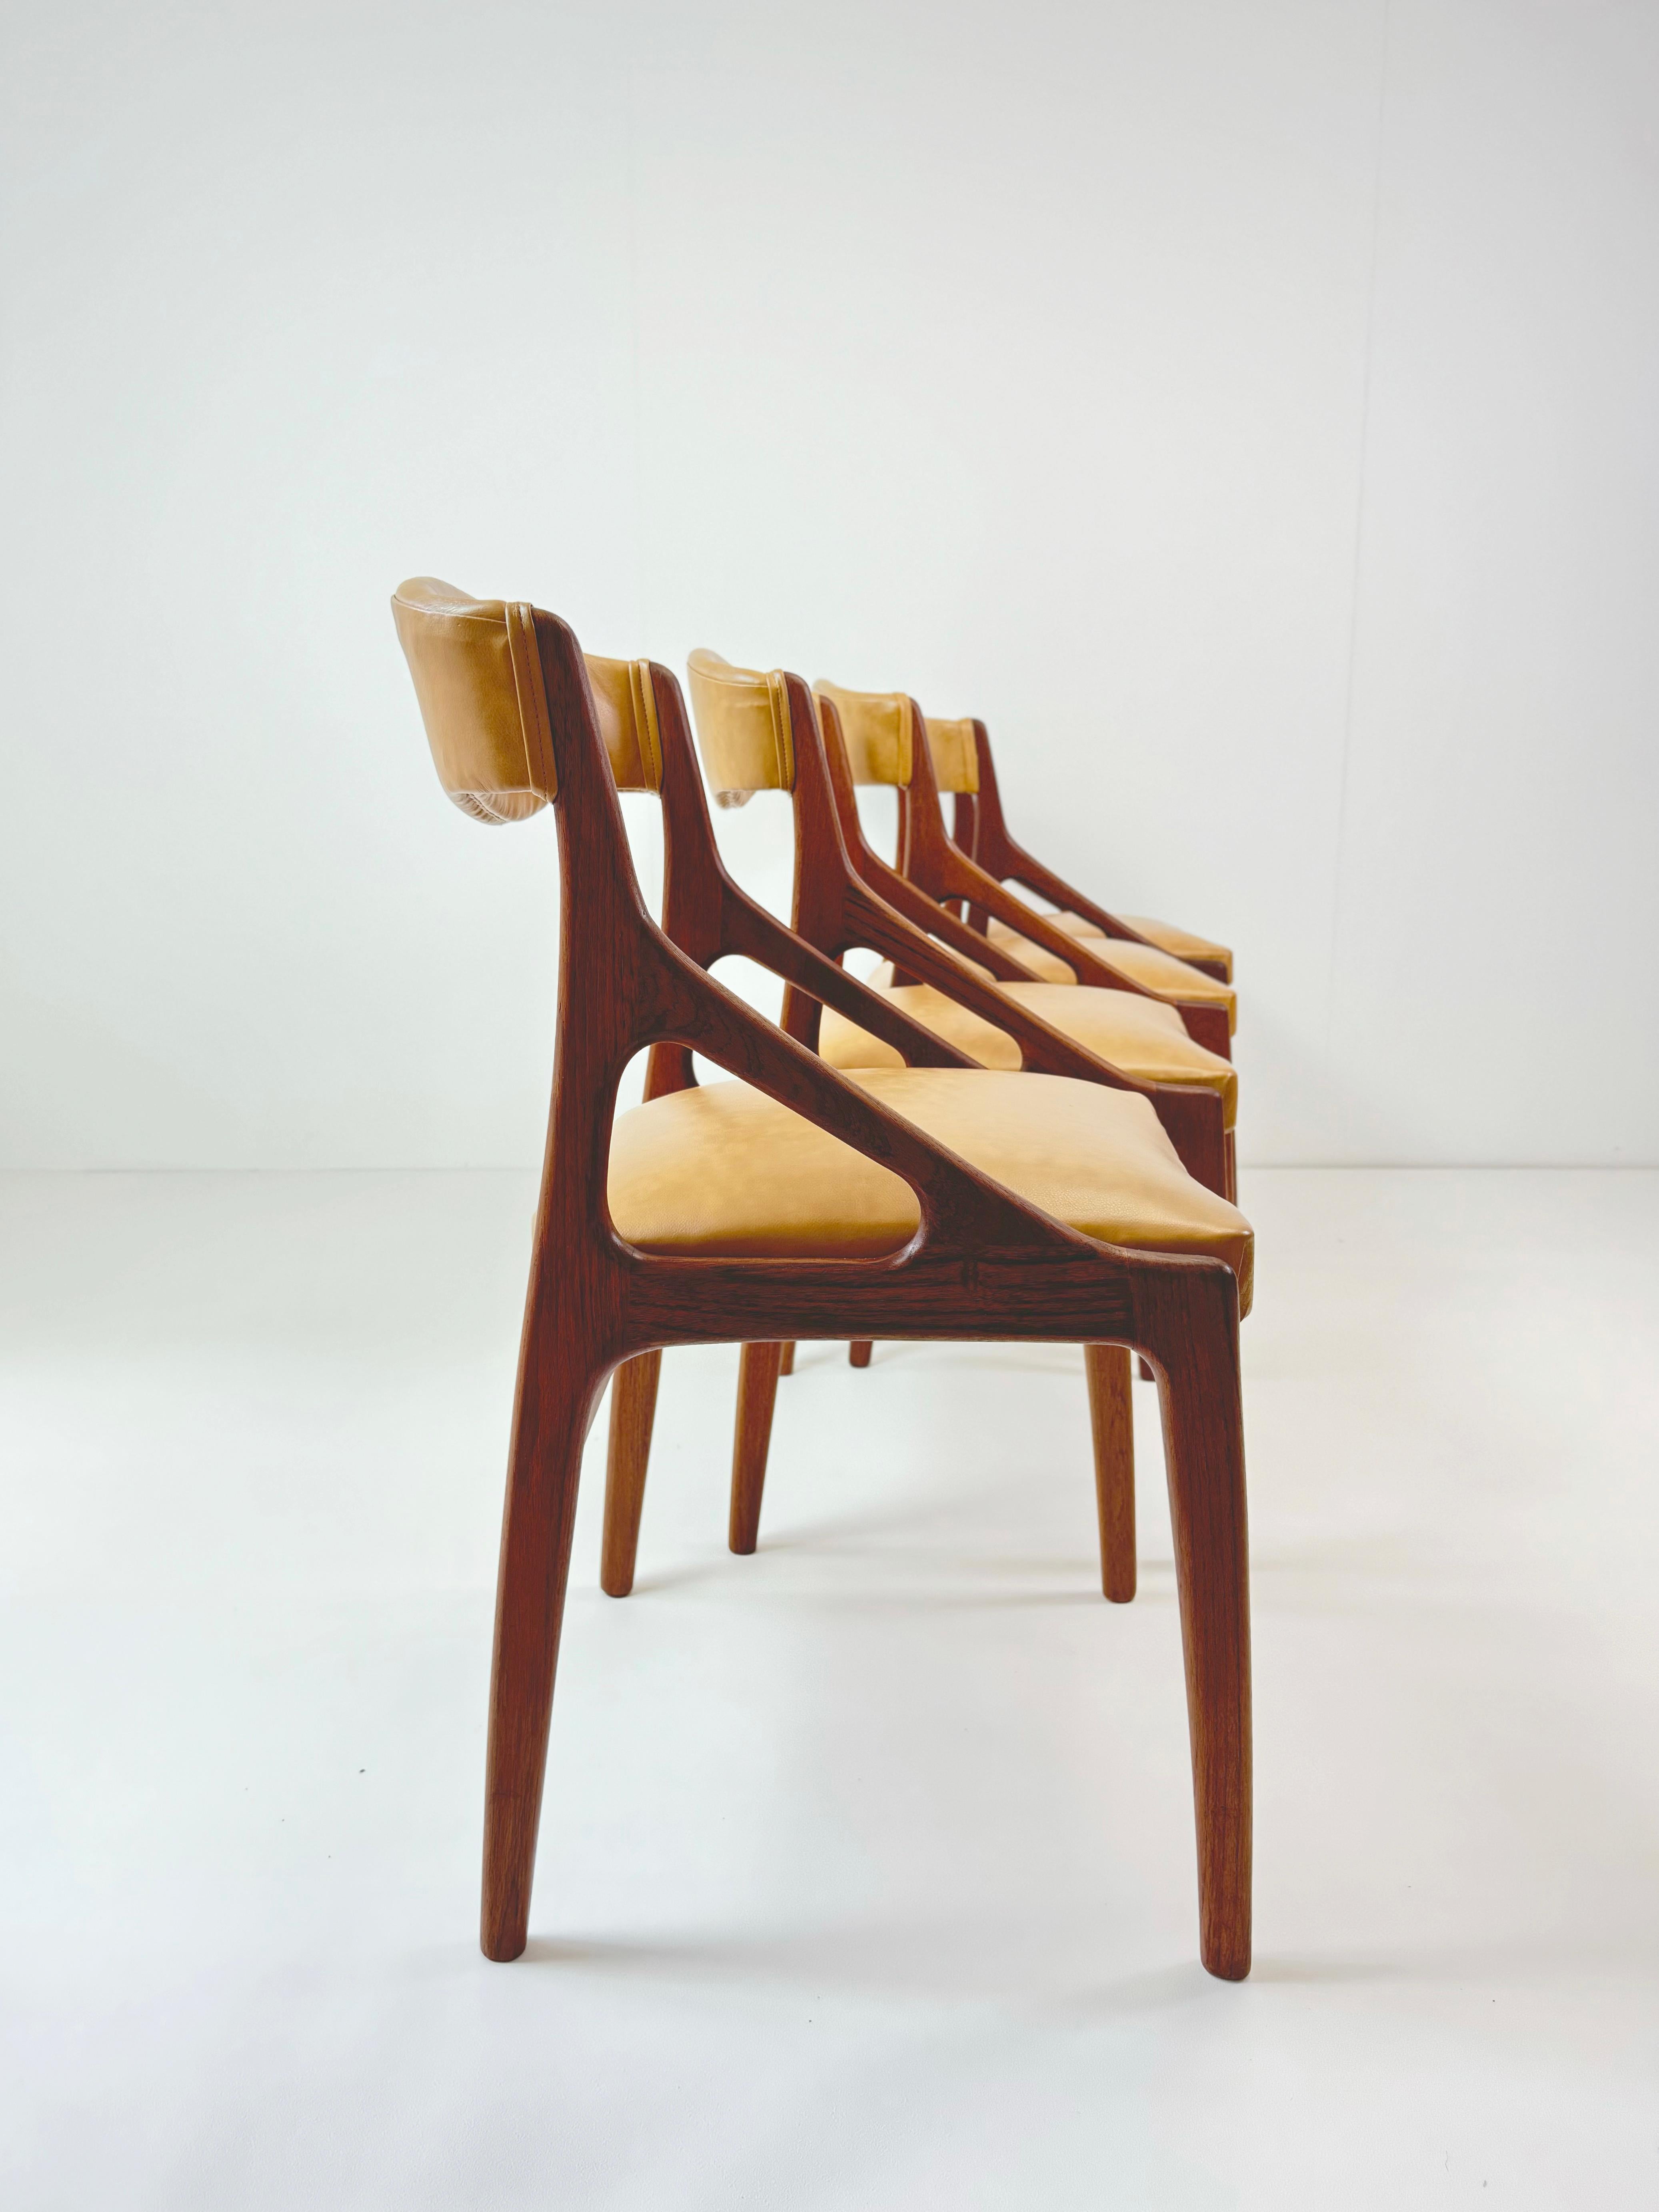 Italian Set of Four Midcentury Modern Teak and Leatherette Dining Chairs c.1960's For Sale